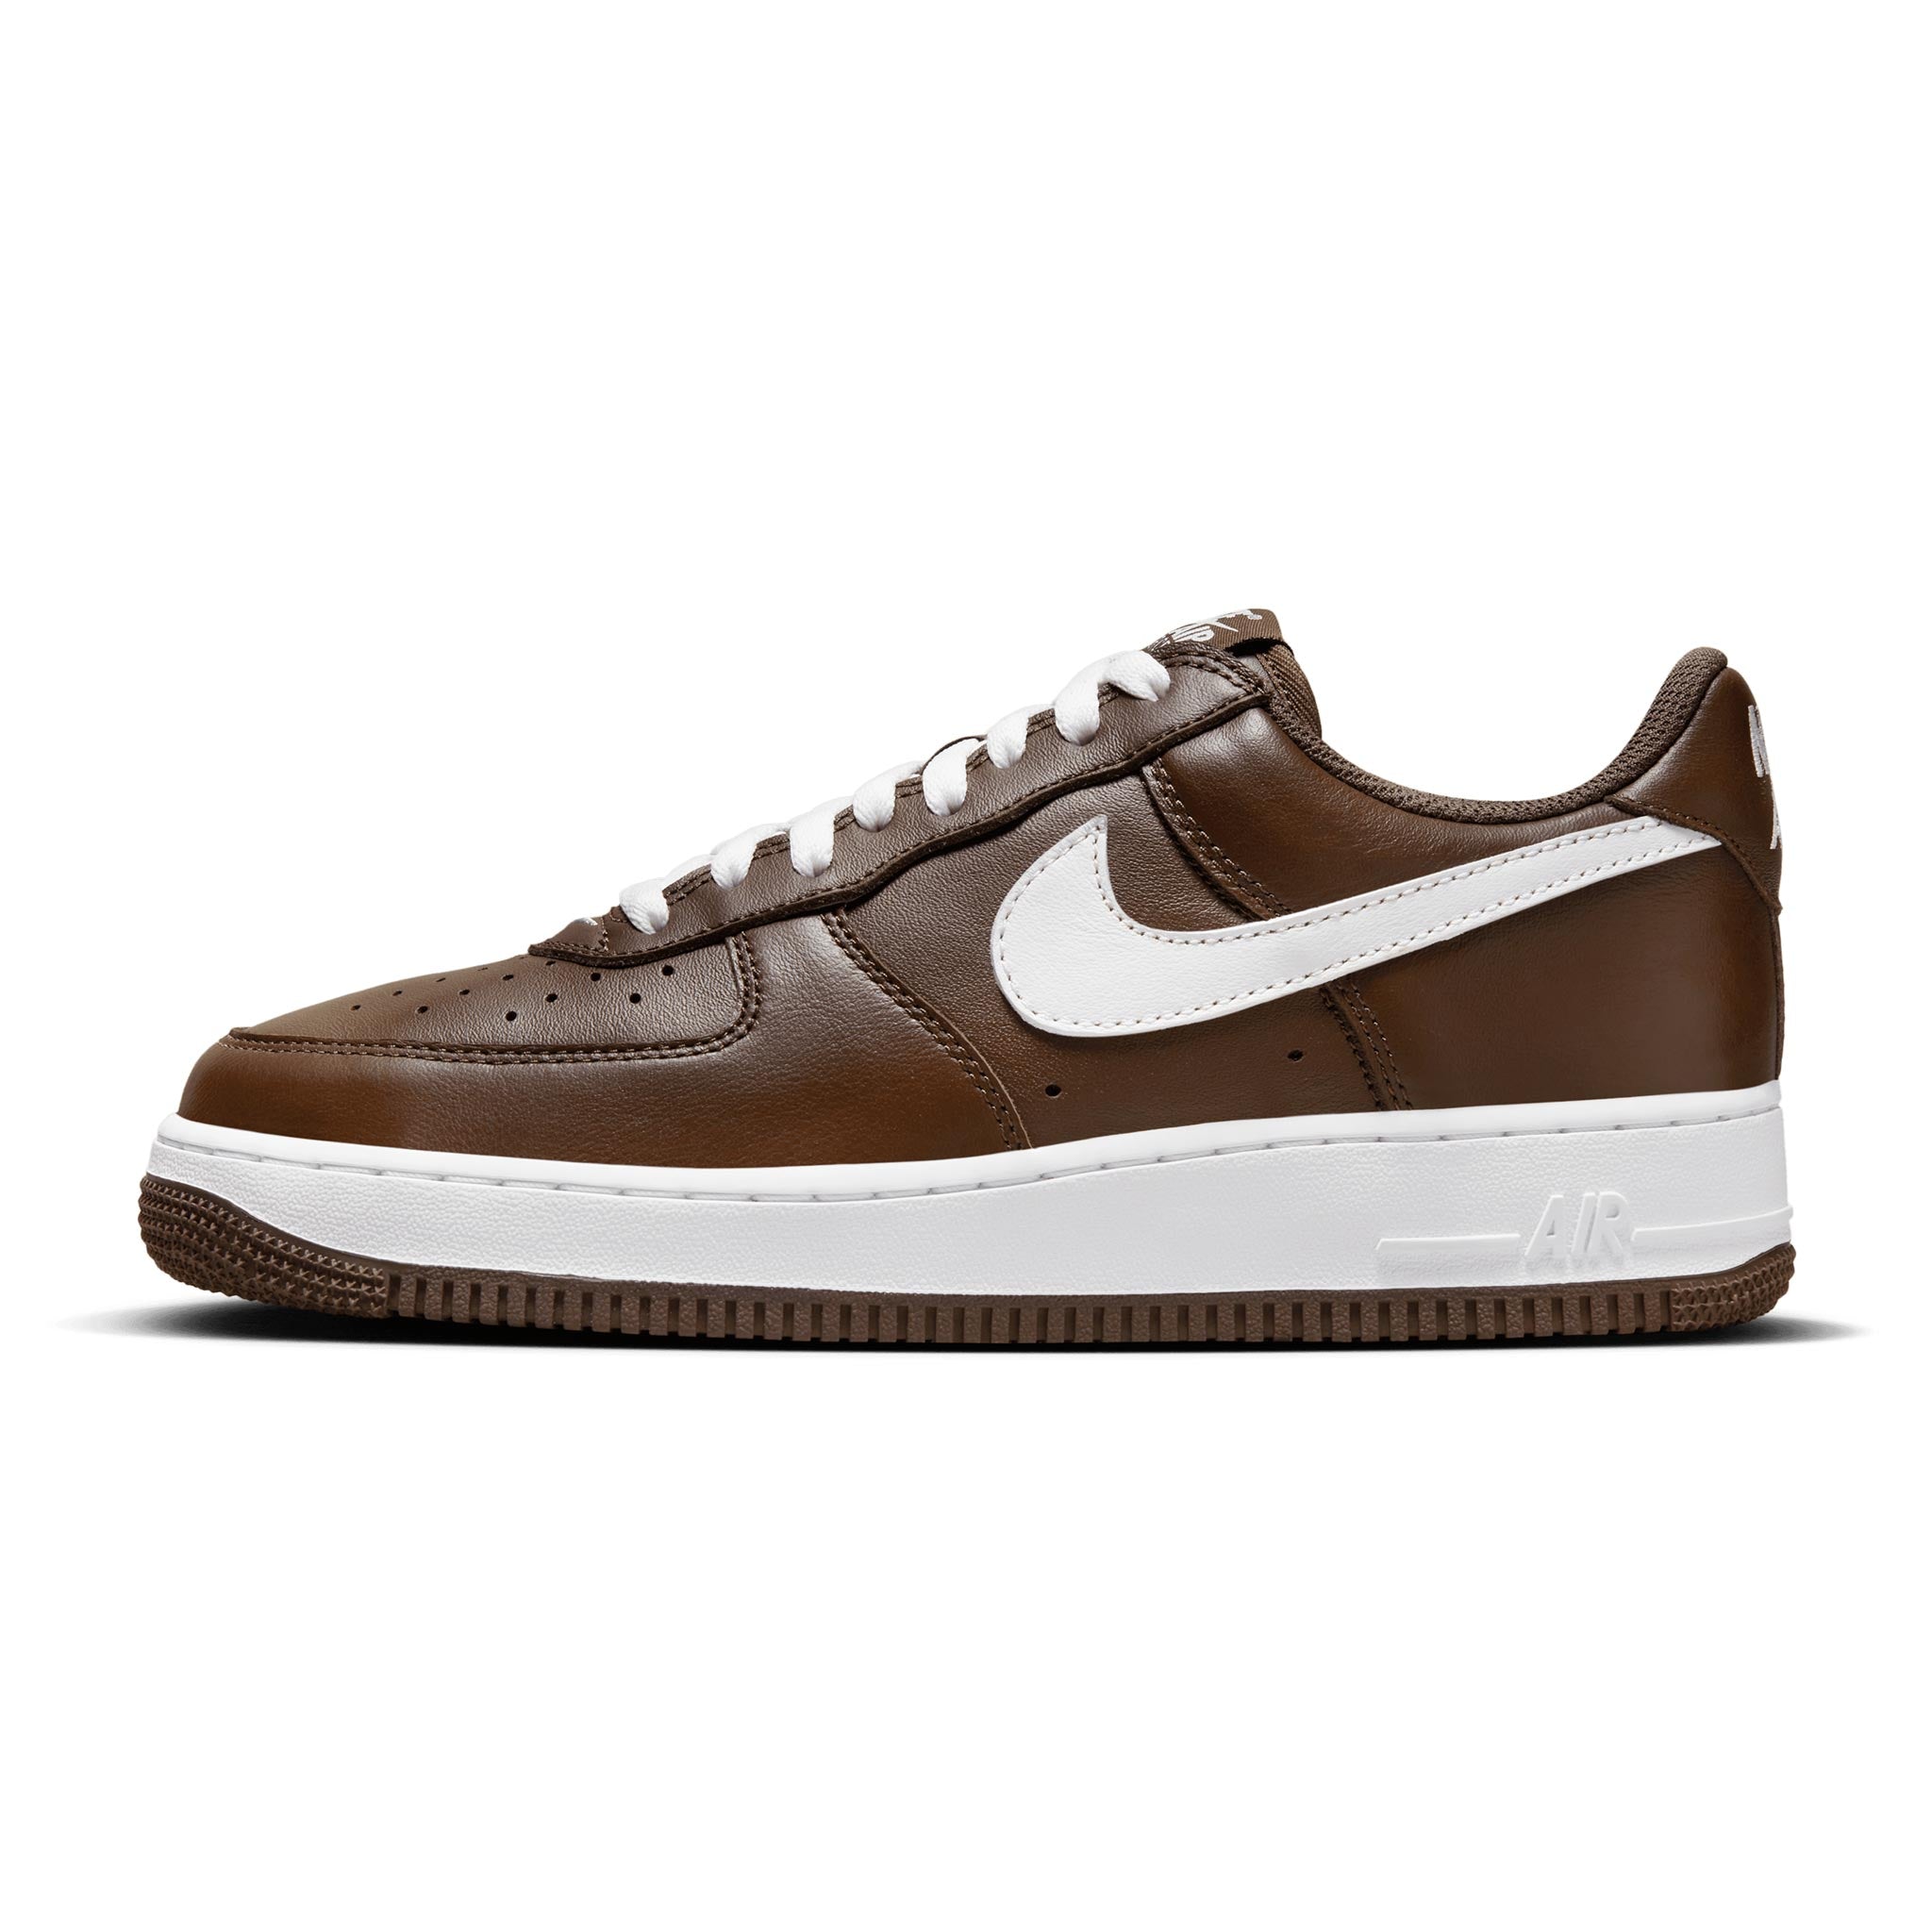 Air Force 1 Low Retro Chocolate FD7039-200